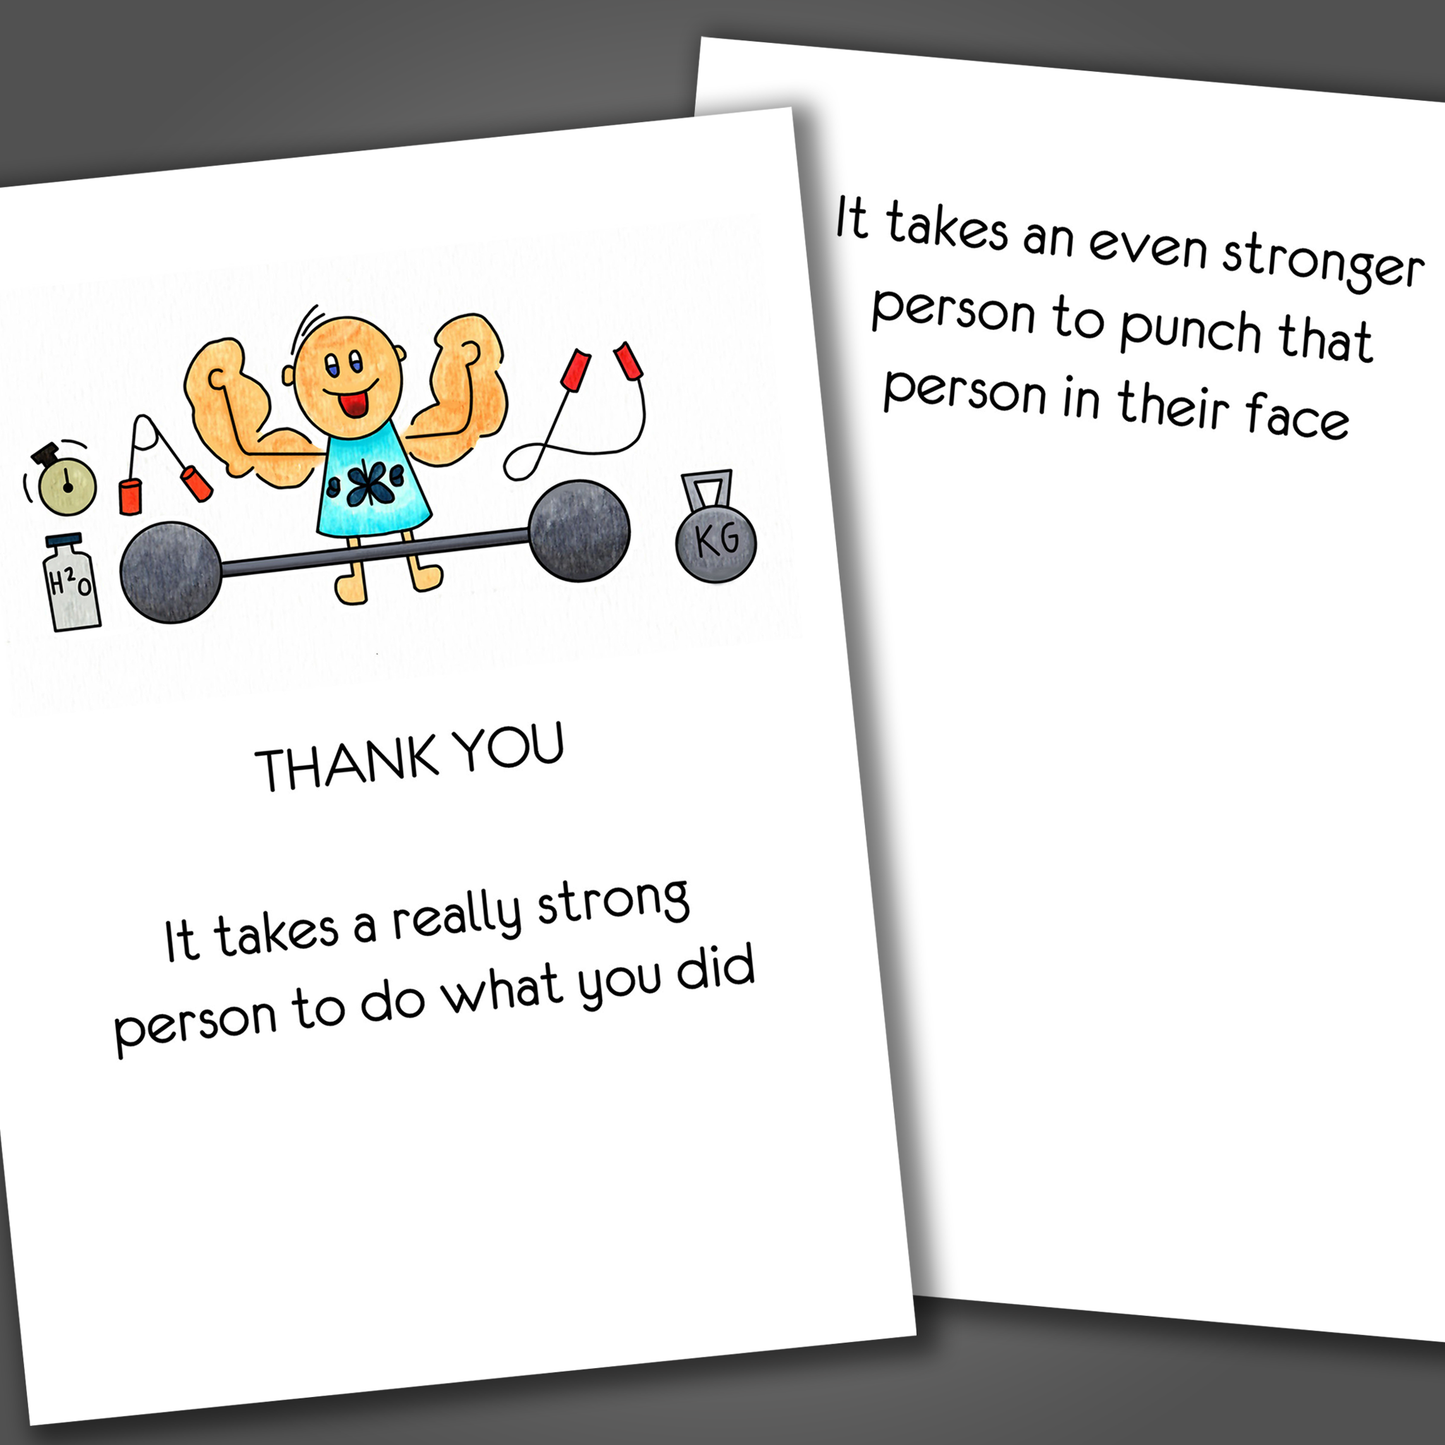 Funny thank you card with a man lifting weights drawn on the front of the card. Inside the card is a funny joke that says it takes an even stronger person to punch that person in their face!